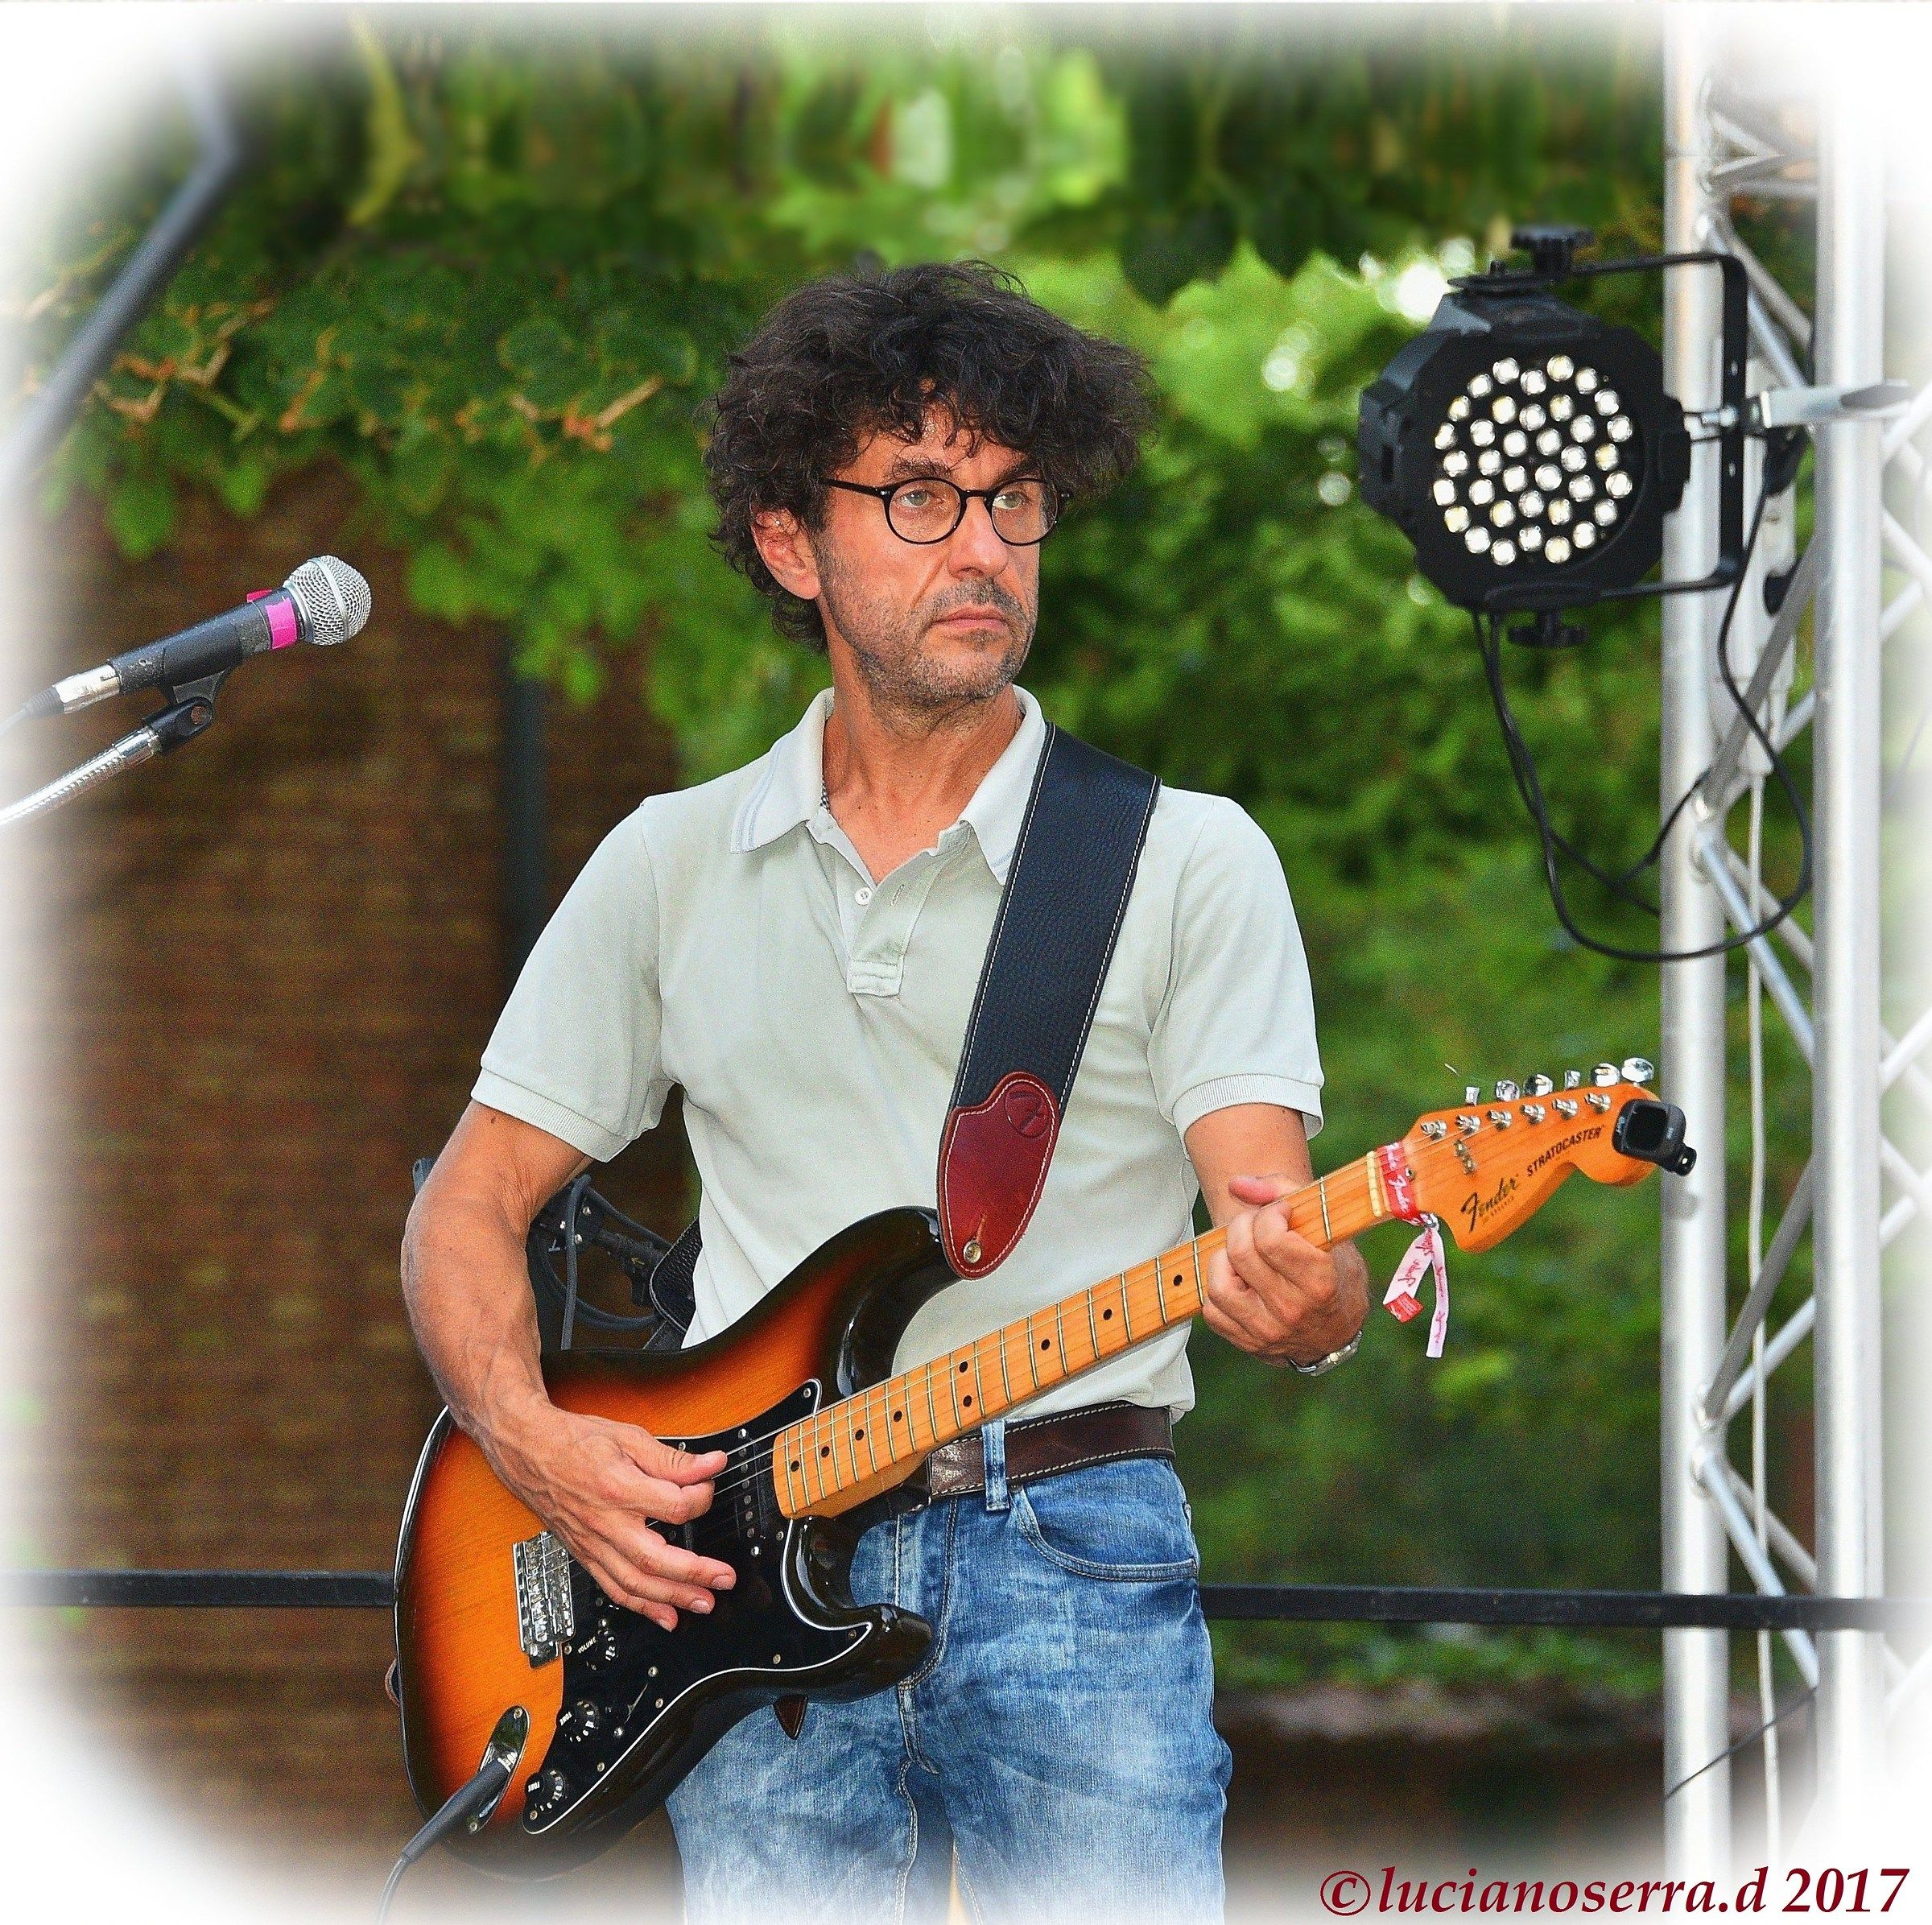 Maurizio Colletti ... the afternoon shows of the concert...